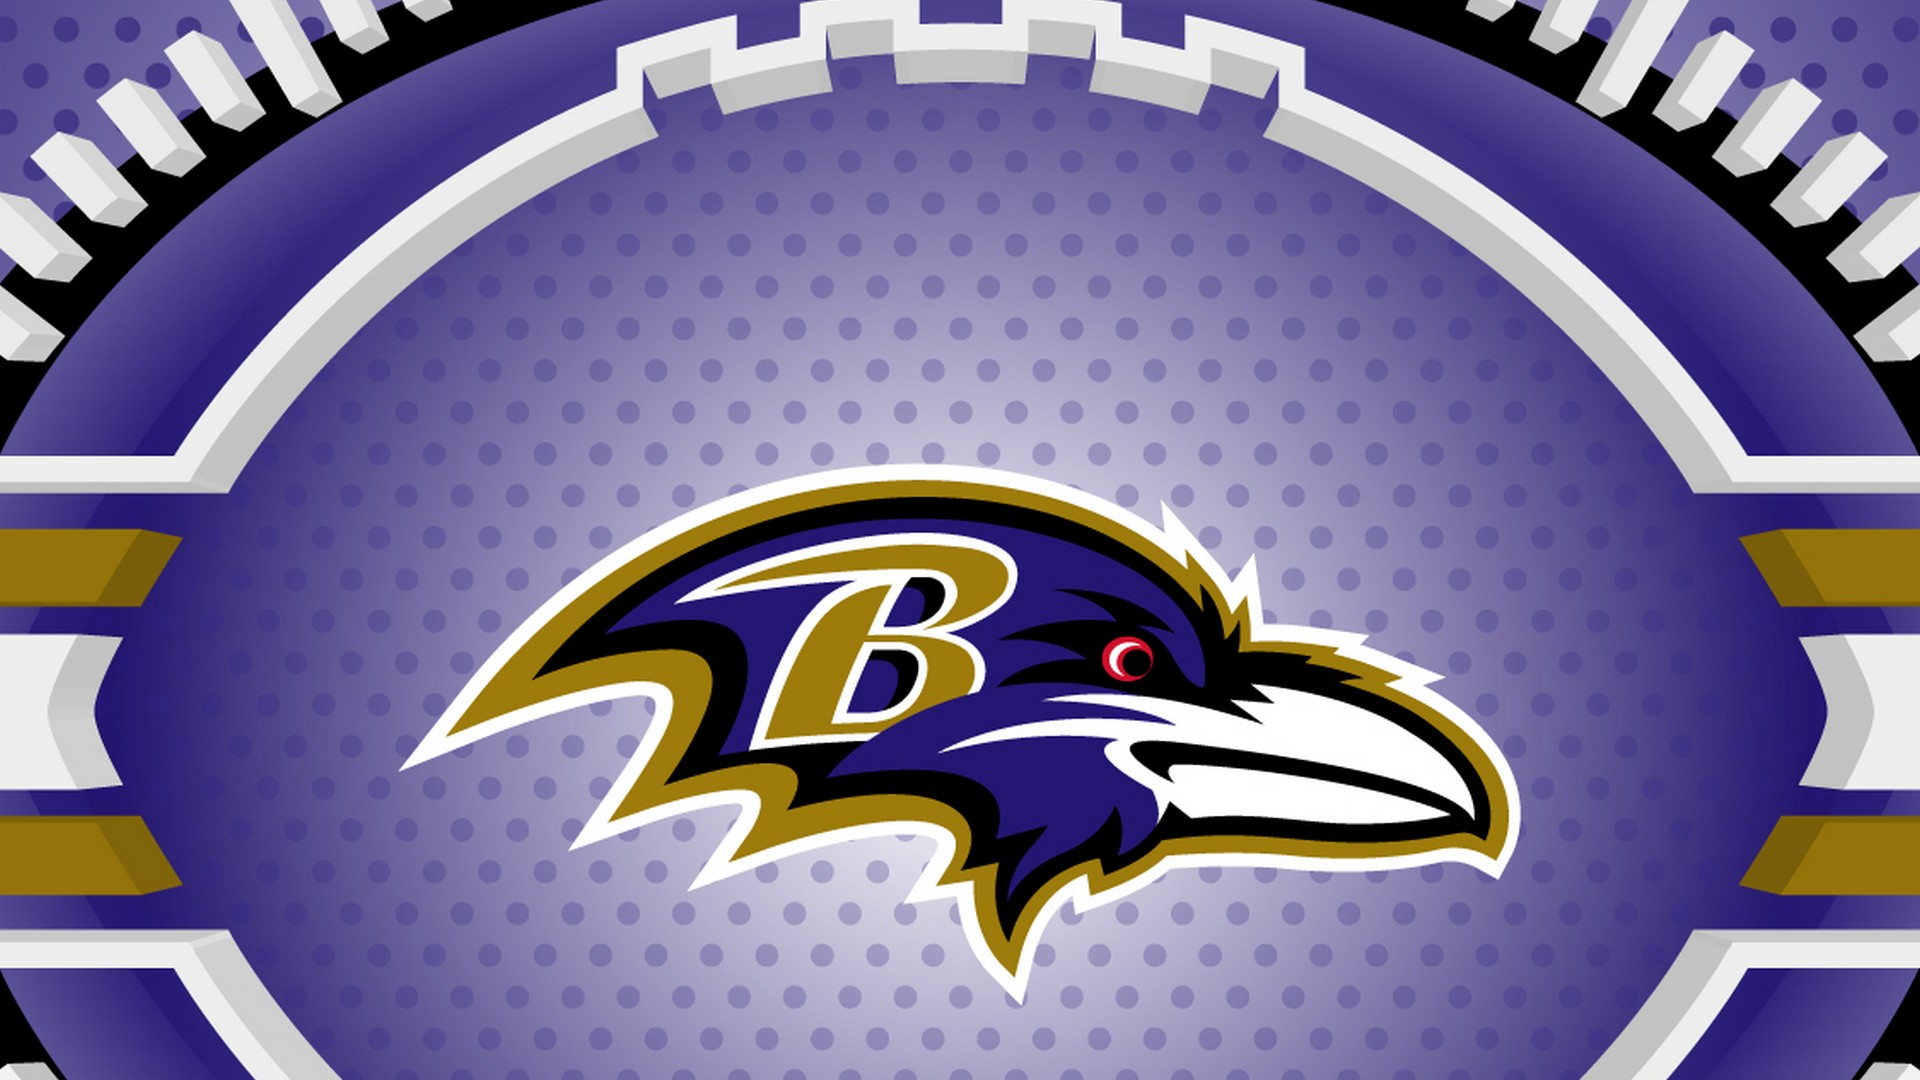 Baltimore Ravens Wallpaper For Mac Backgrounds With Resolution 1920X1080